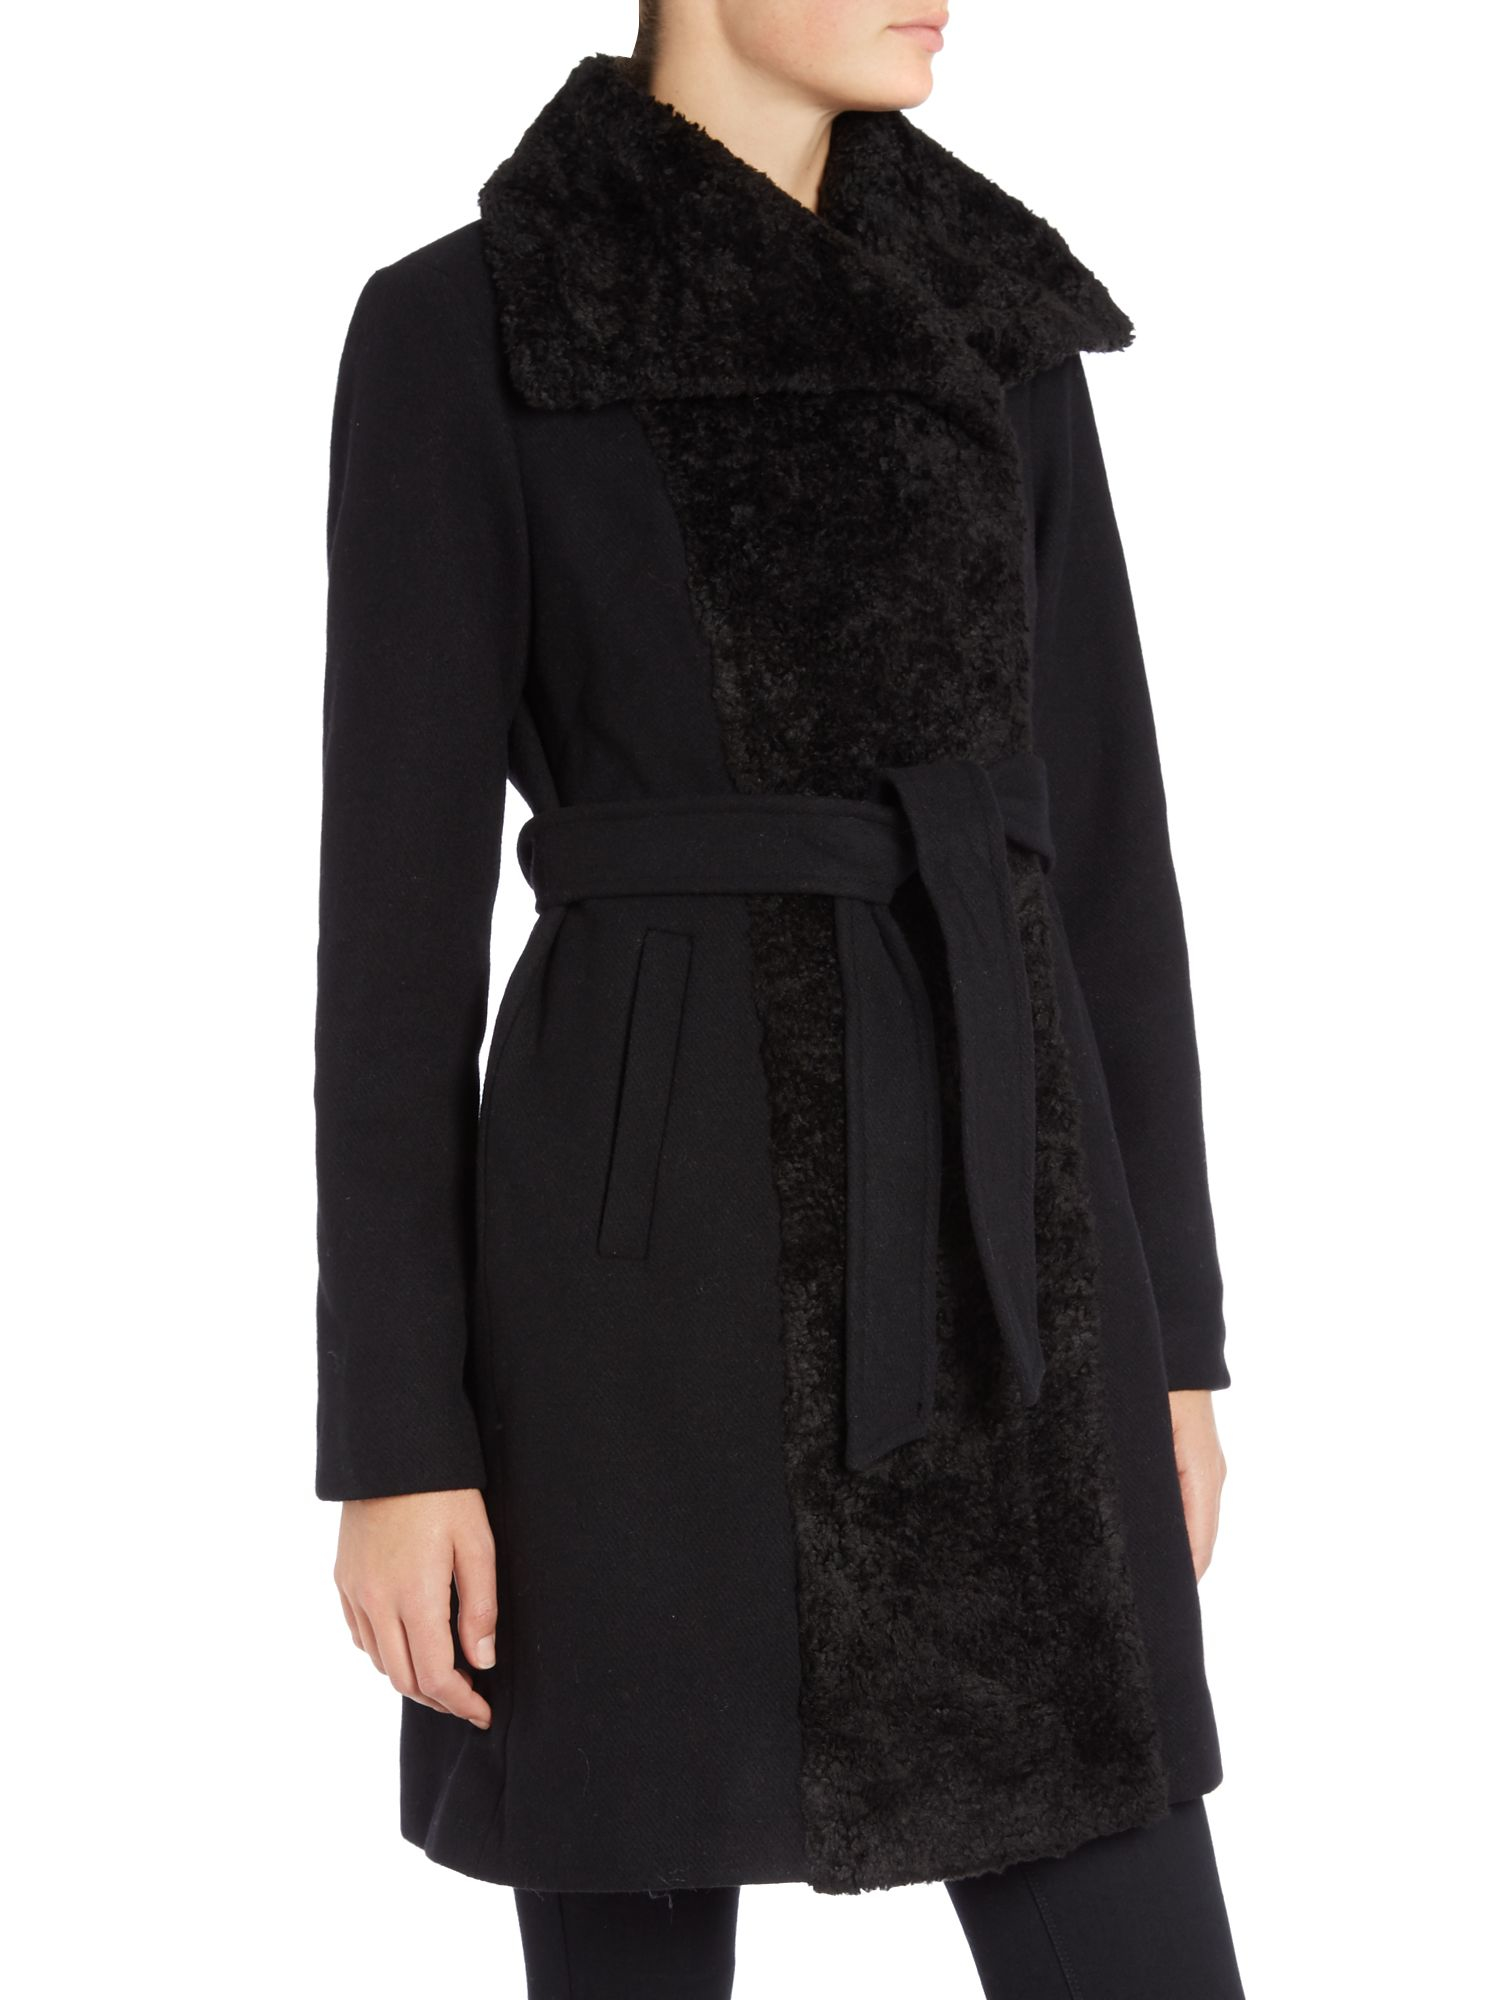 Vince camuto Wool Wrap Coat With Fur Collar in Black | Lyst